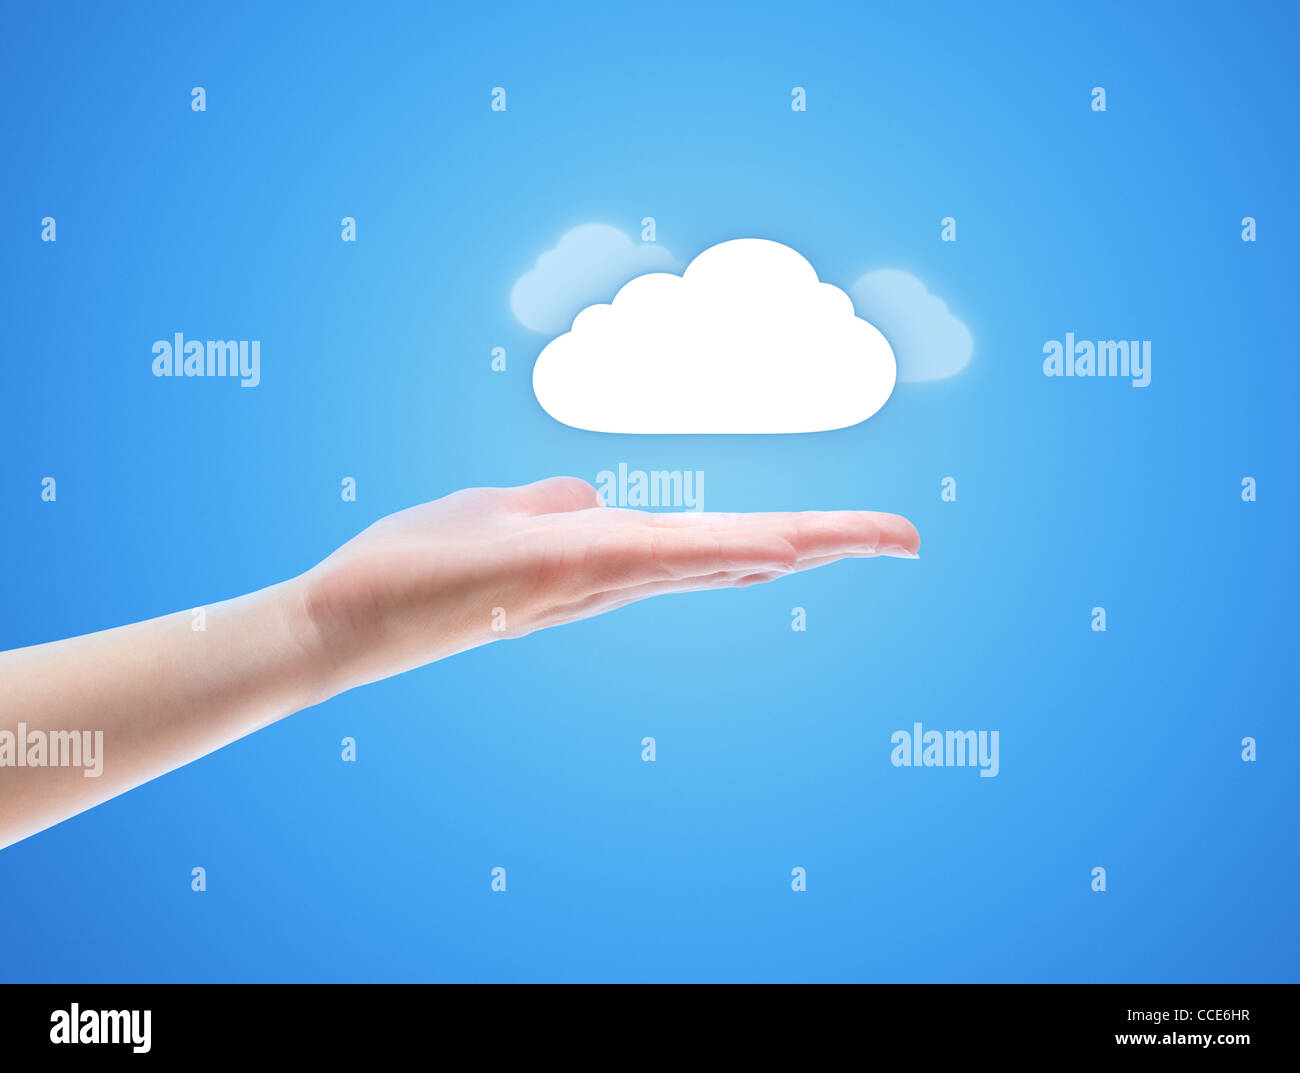 Woman hand share the cloud against blue background. Concept image on cloud computing theme with copy space. Stock Photo